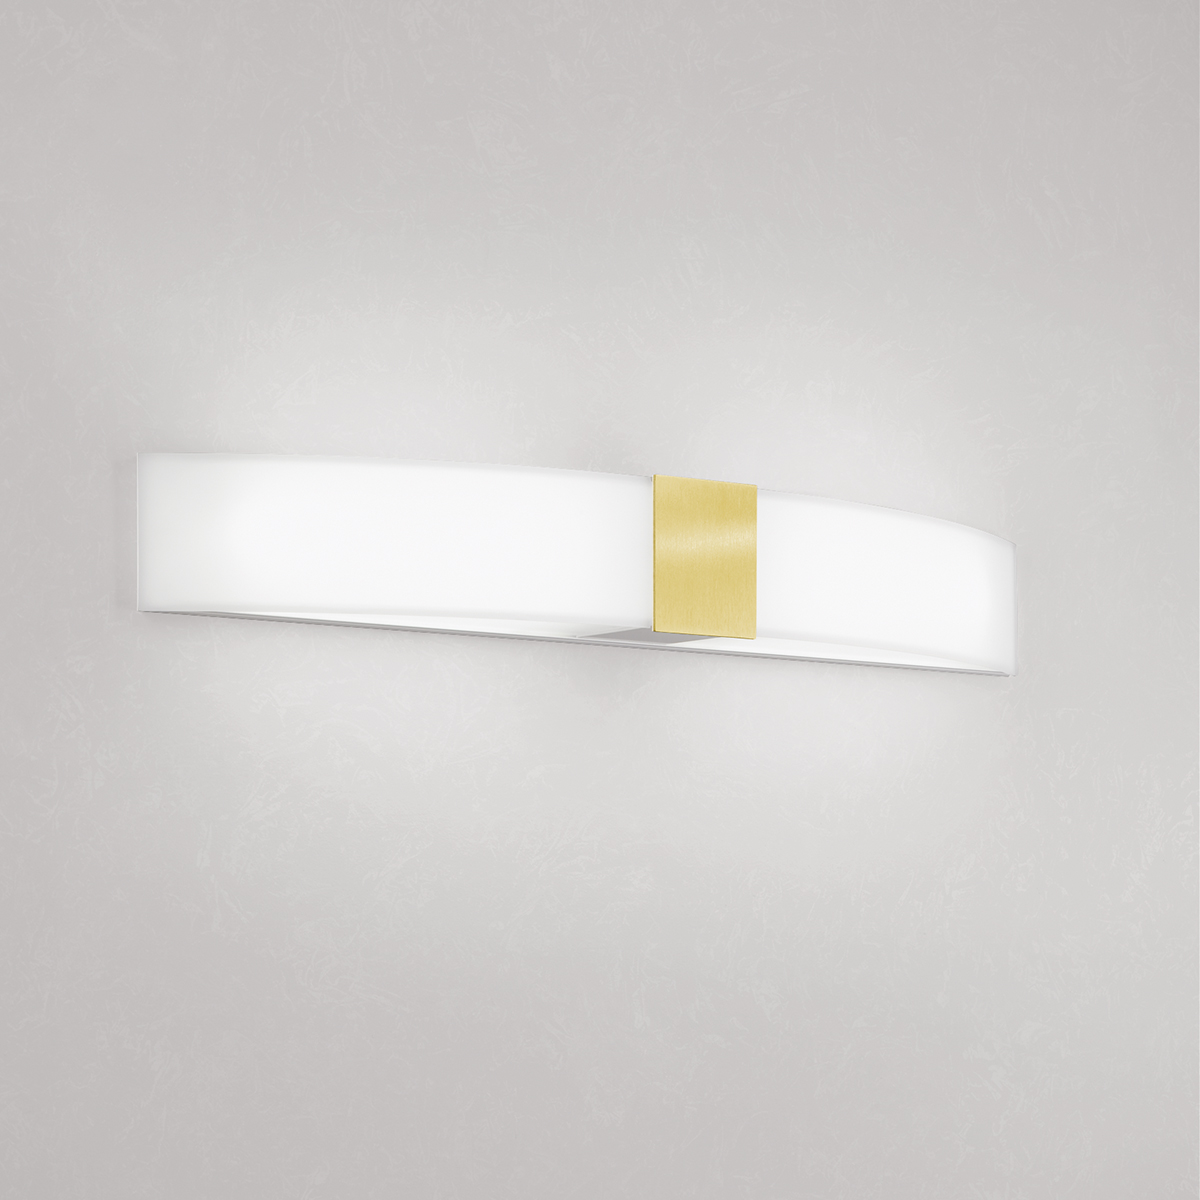 A long, curved wall sconce with a luminous body and a square accent in the middle